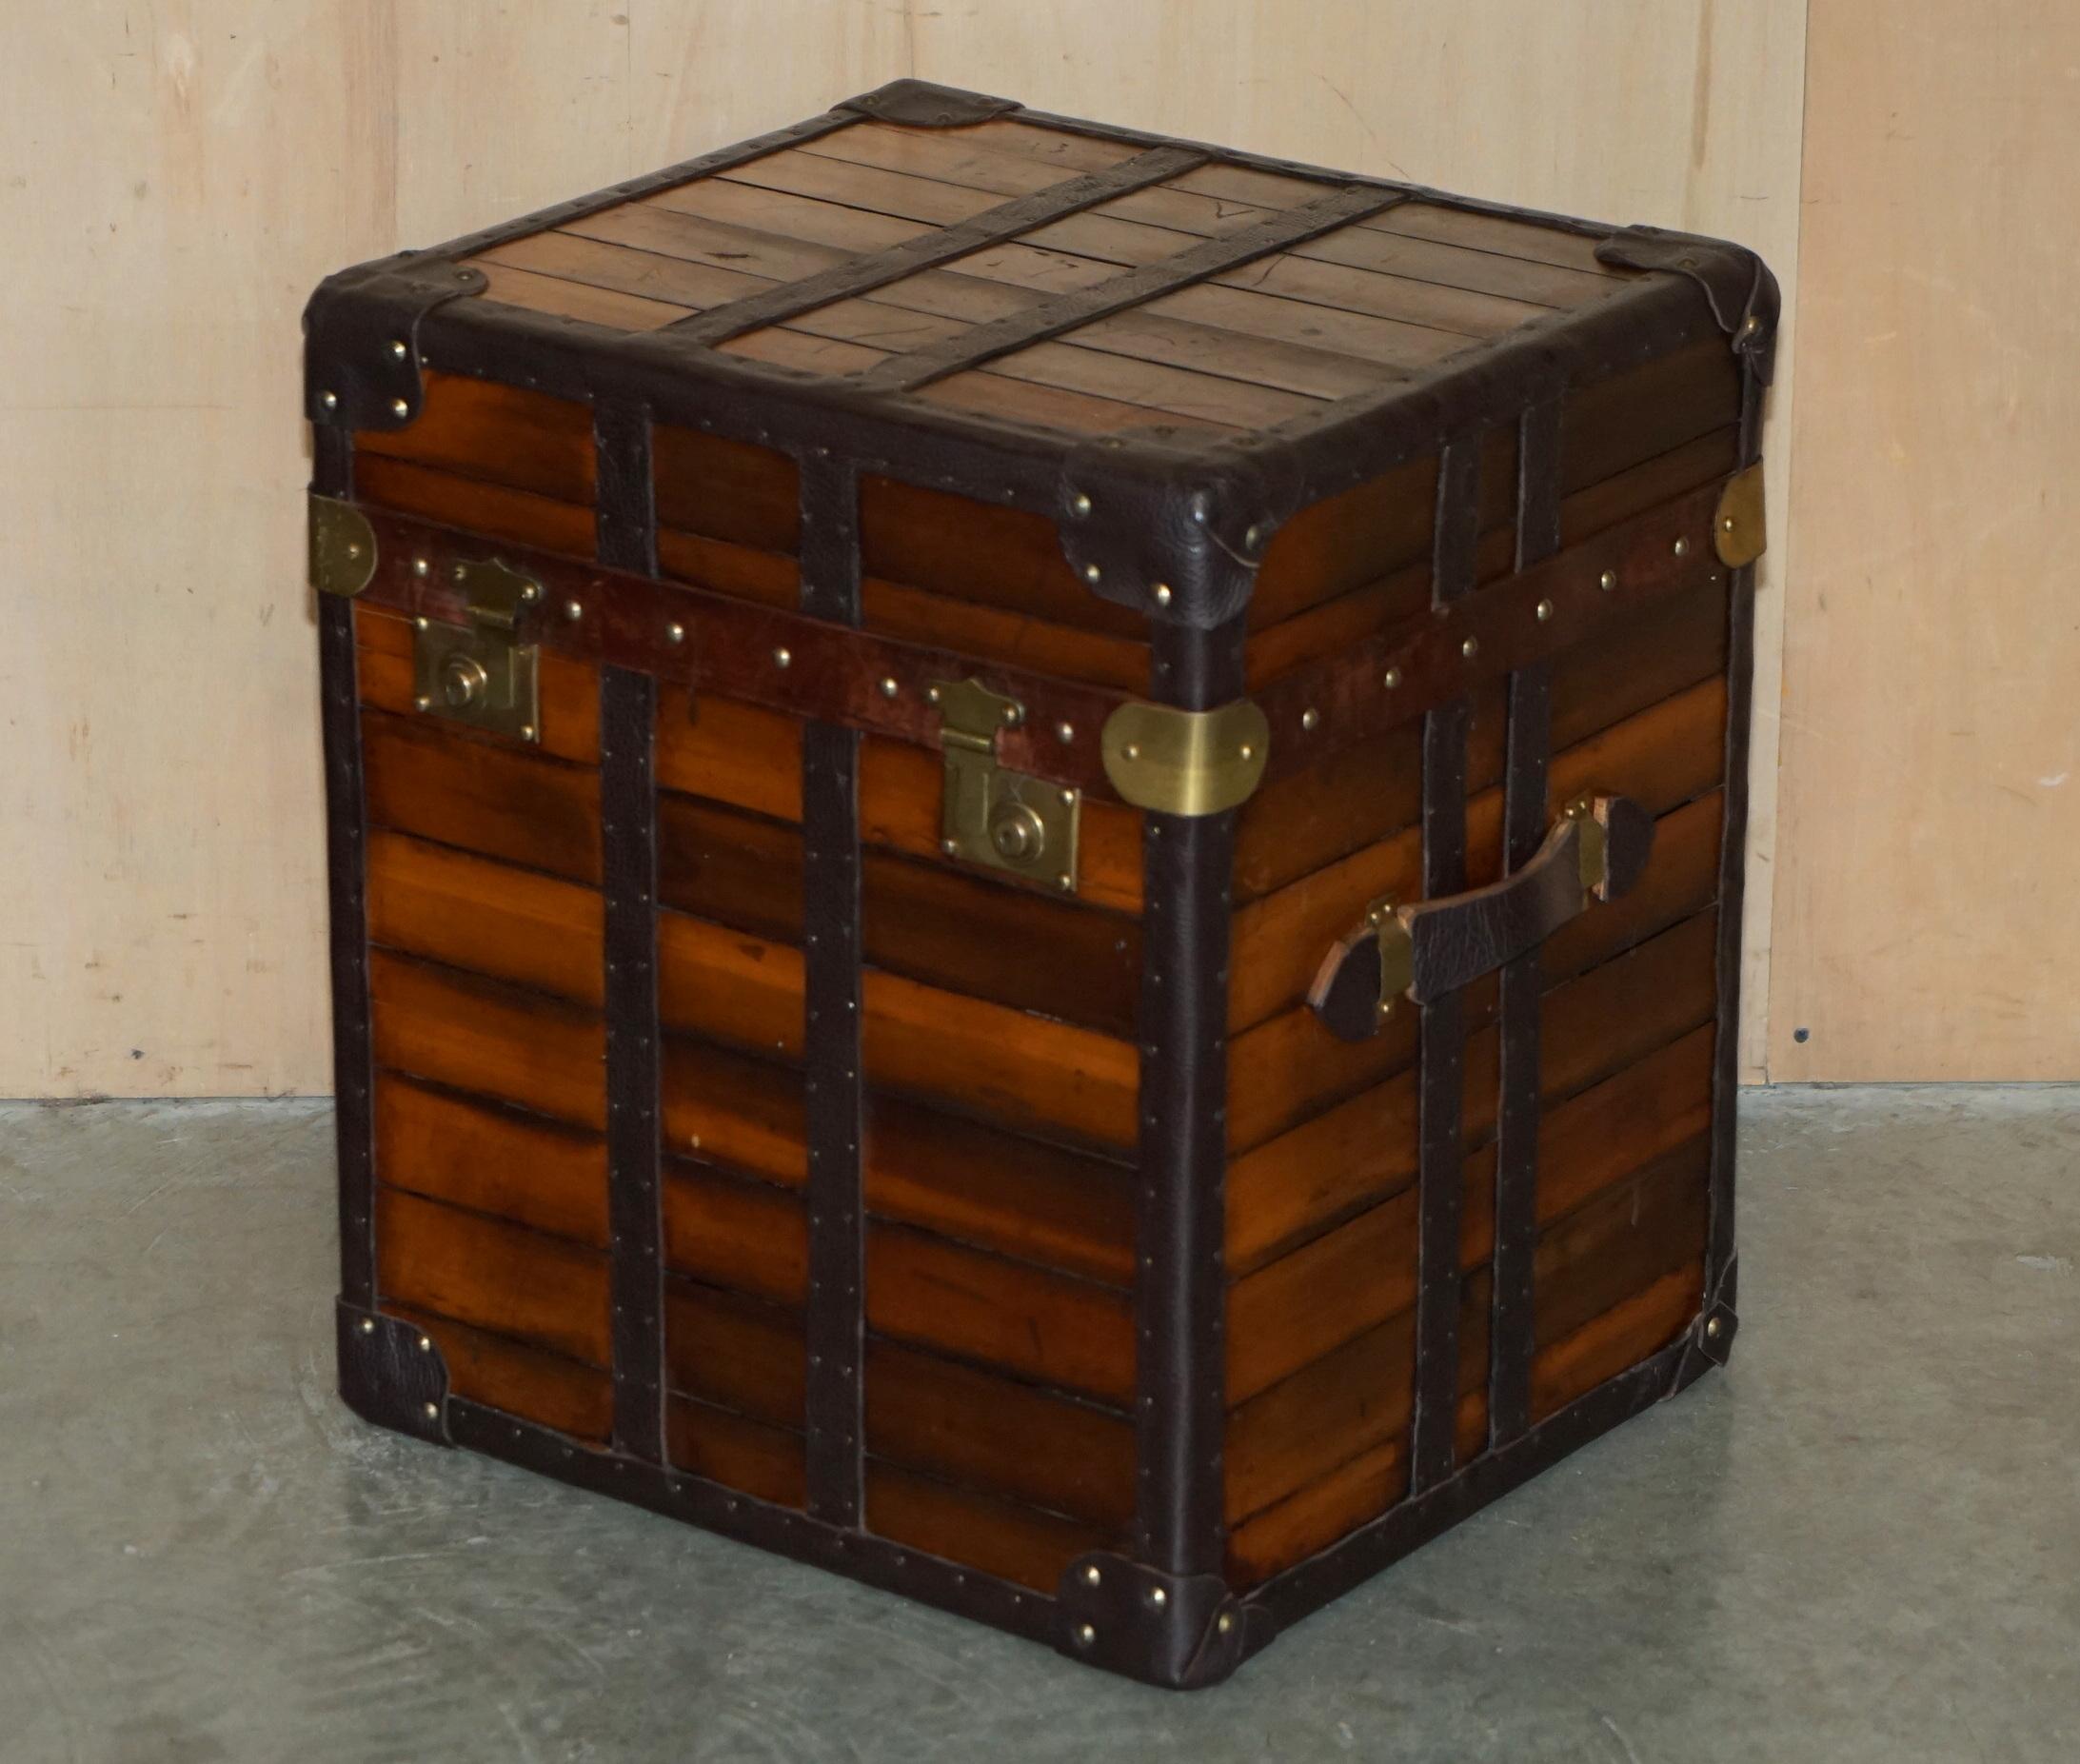 Royal House Antiques

Royal House Antiques is delighted to offer for sale this lovely pair of vintage side table sized luggage steamer trunks made from slatted wood and leather strapped then finished with Made in England brass locks

Please note the